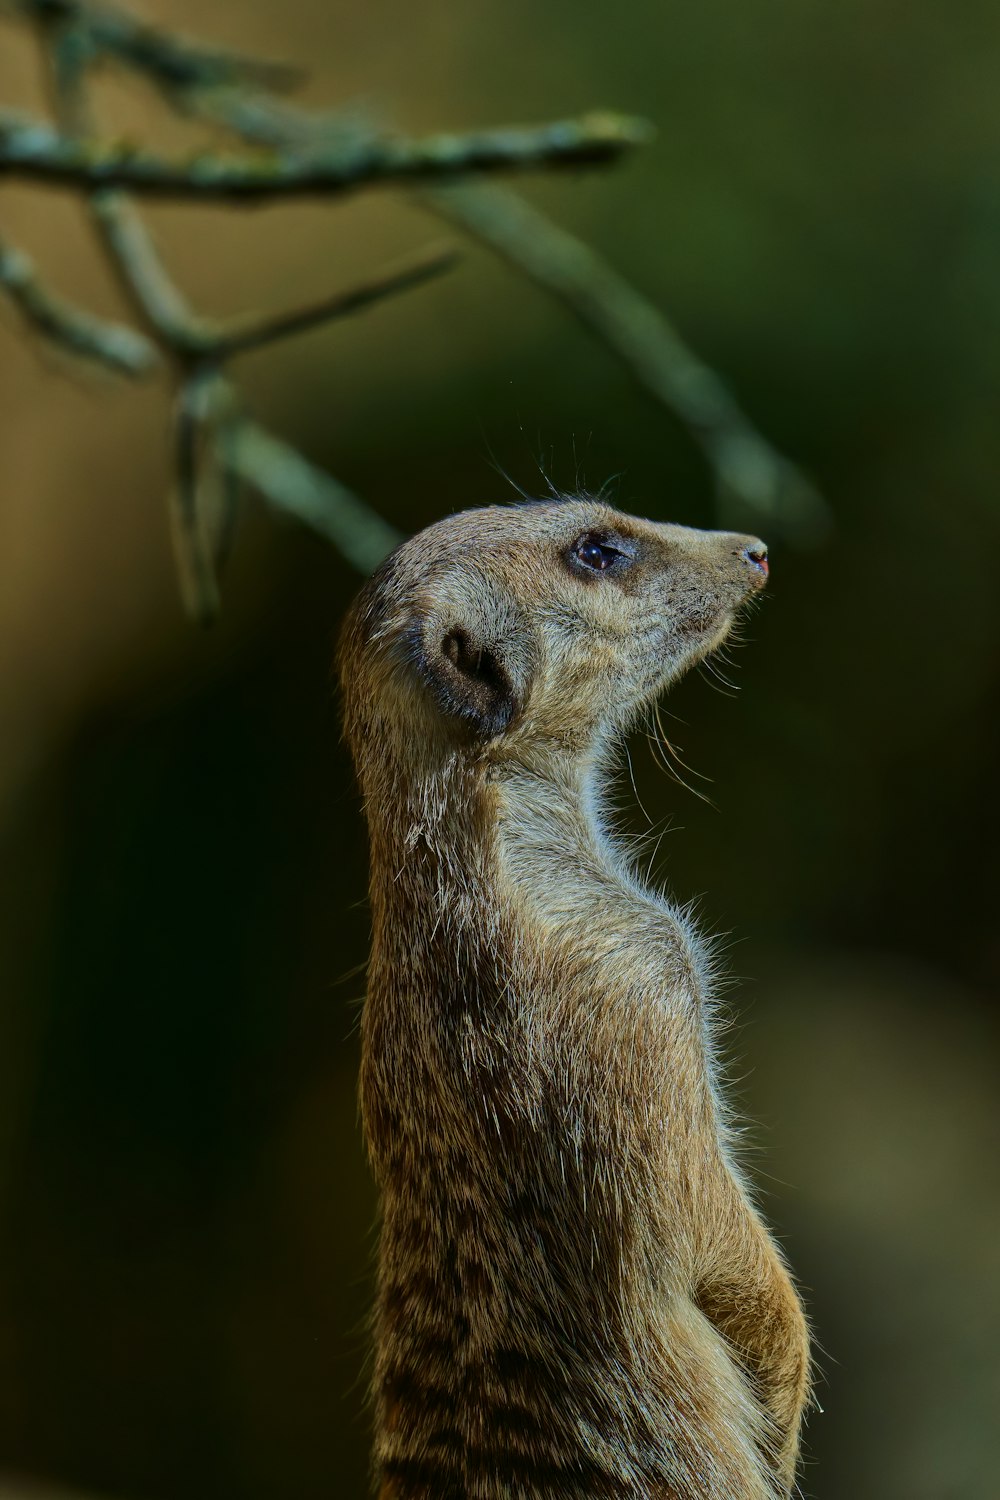 a meerkat standing on its hind legs looking up